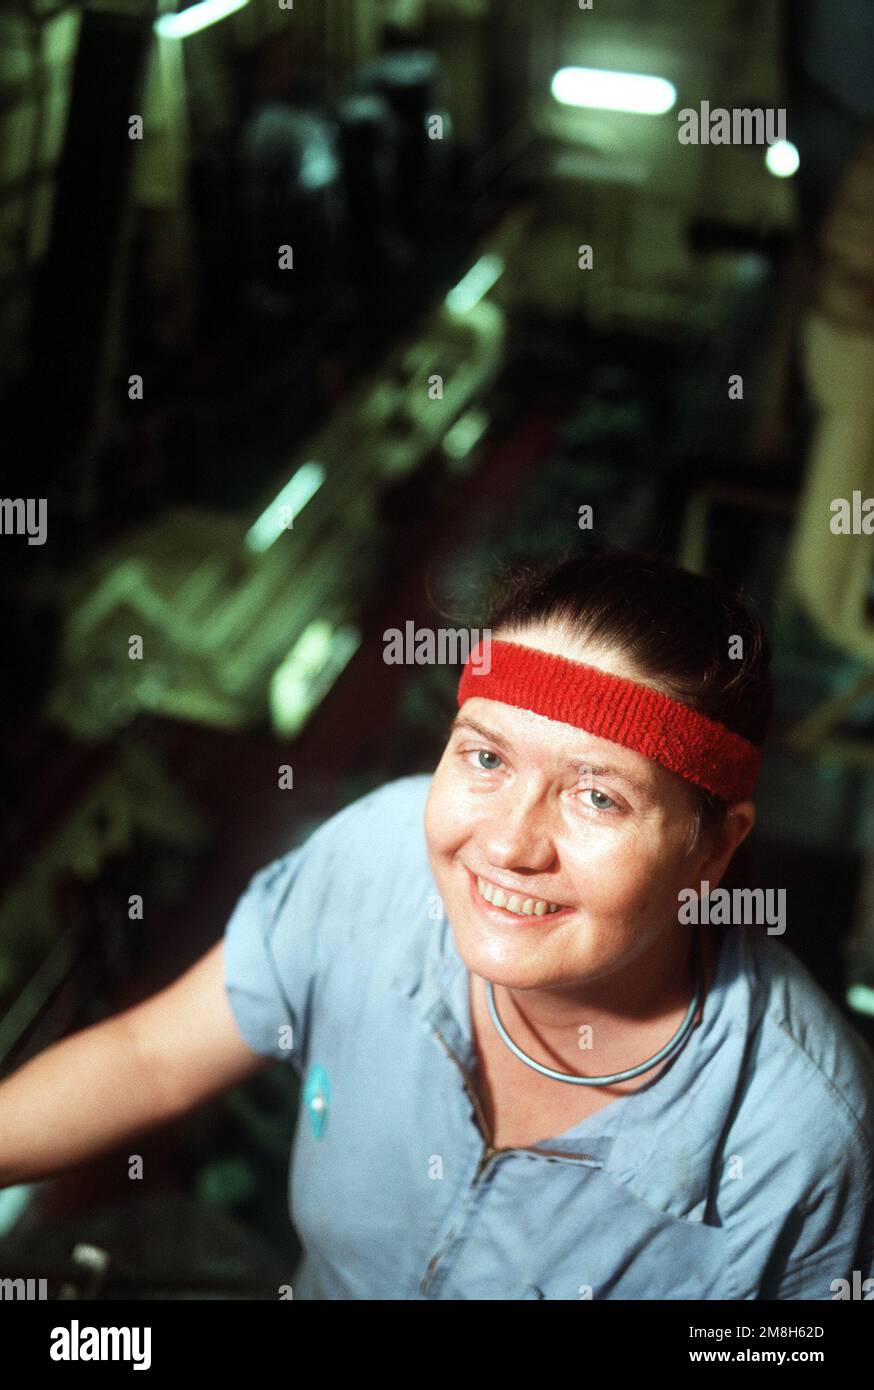 An informal portrait of 41 year old Cloda 'Charlie' Kelley, a former U.S. Navy Corpsman, working in the engine room of the Military Sealift Command prepostioning ship PVT. FRANKLIN J. PHILLIPS (T-AK-3013). Charlie served five years in the U.S. Navy before shipping over to the U.S. Merchant Marine Service. Country: Somalia (SOM) Stock Photo